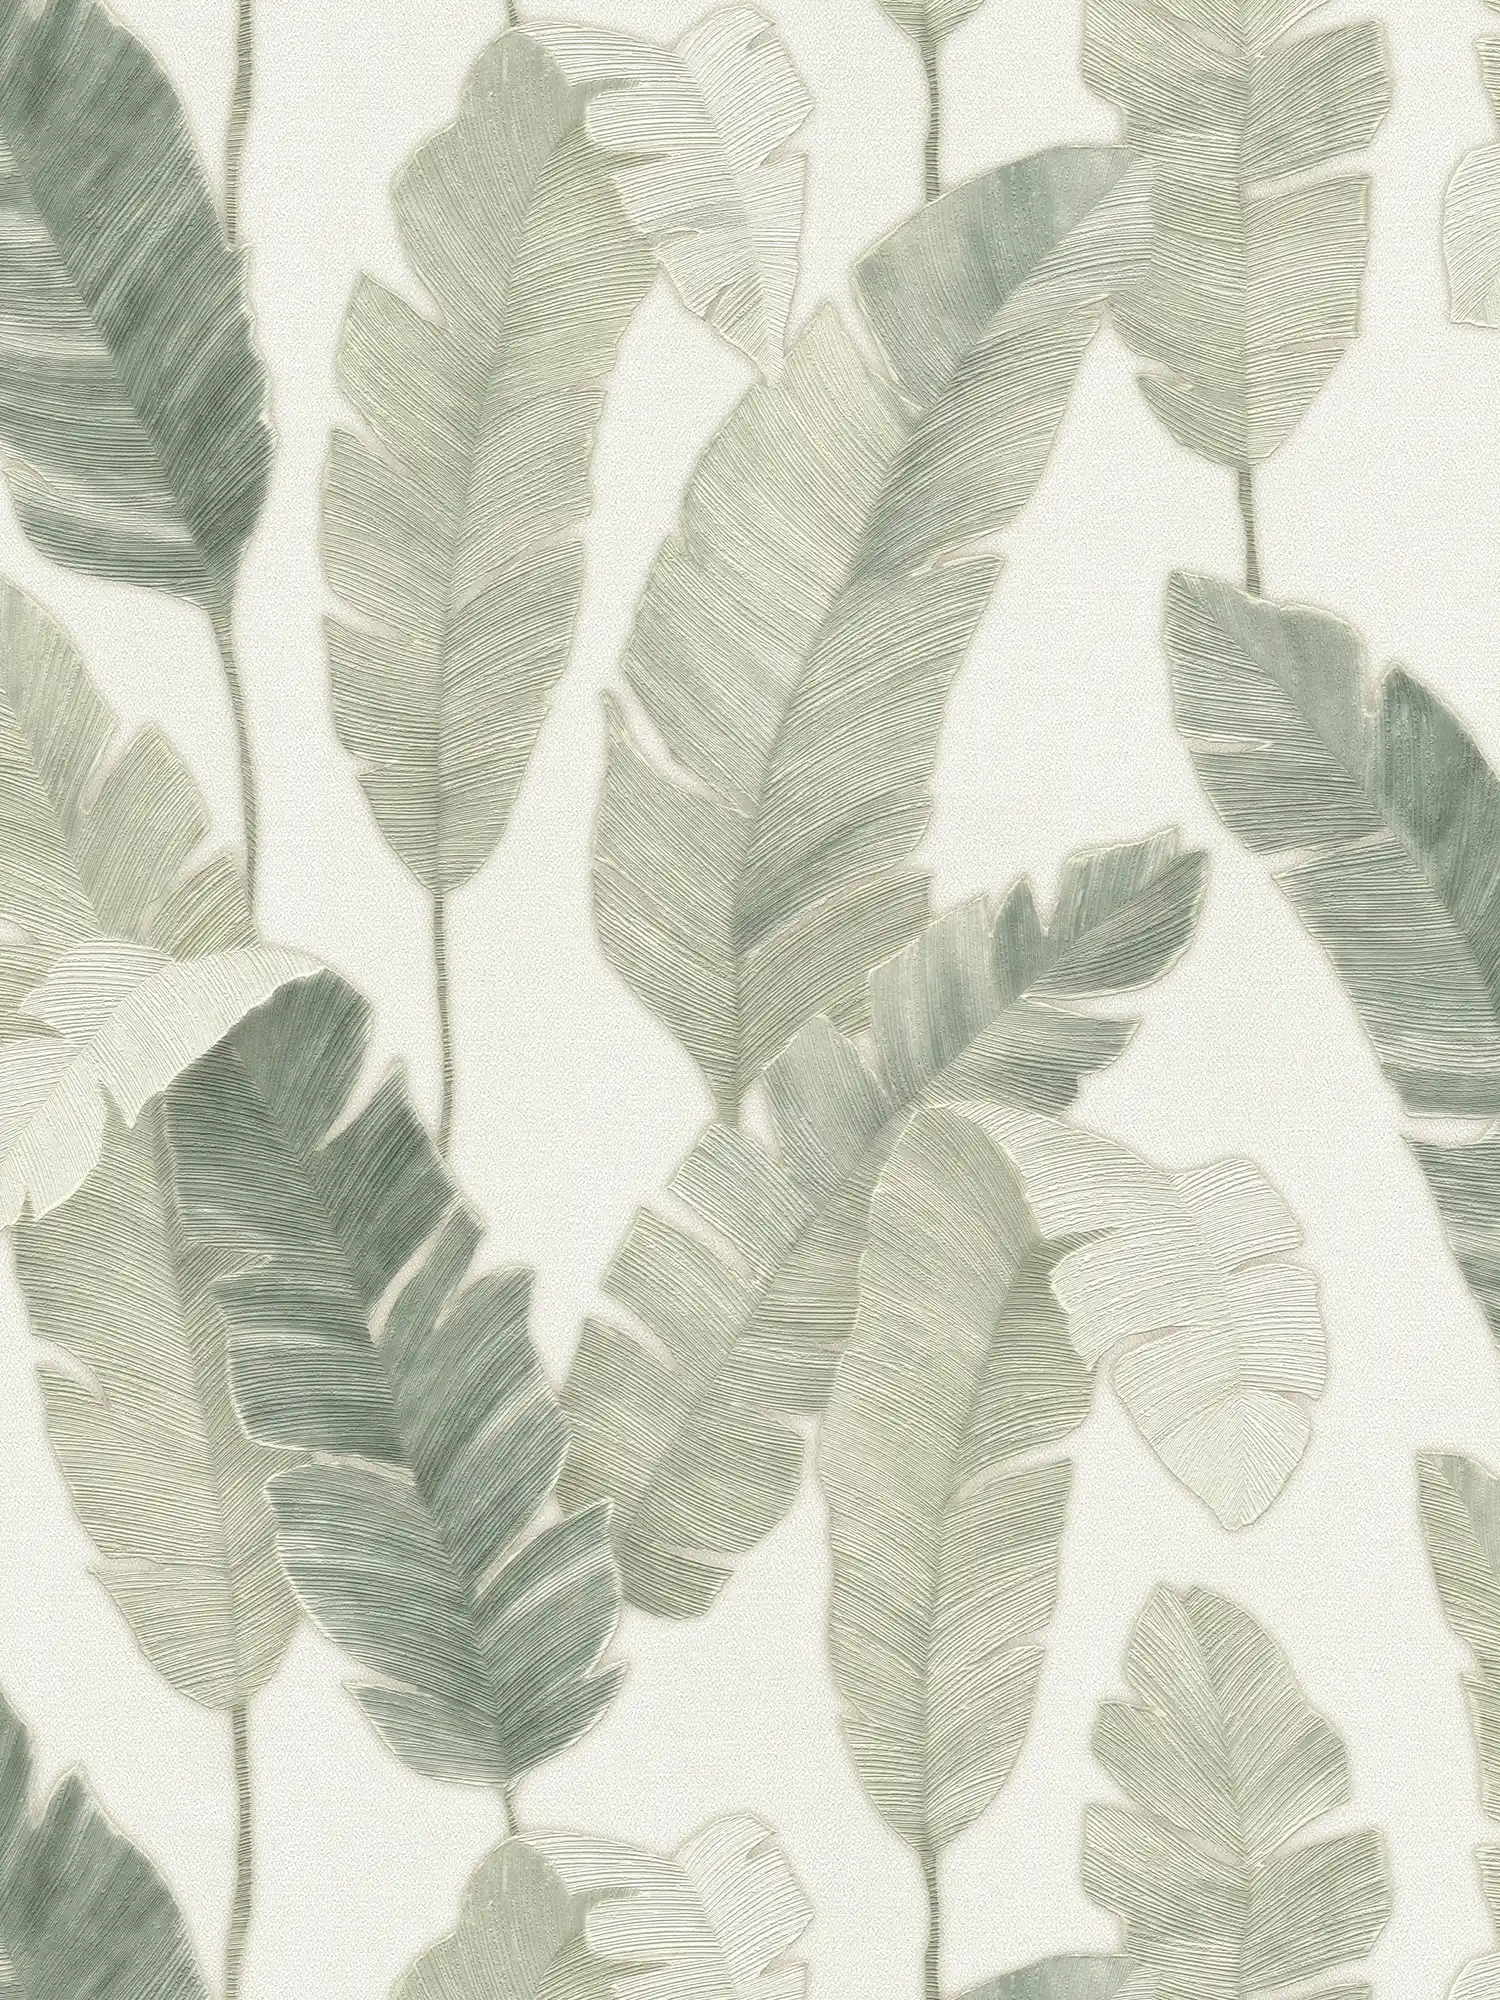 Non-woven wallpaper with palm leaves in light colour - white, green, blue
